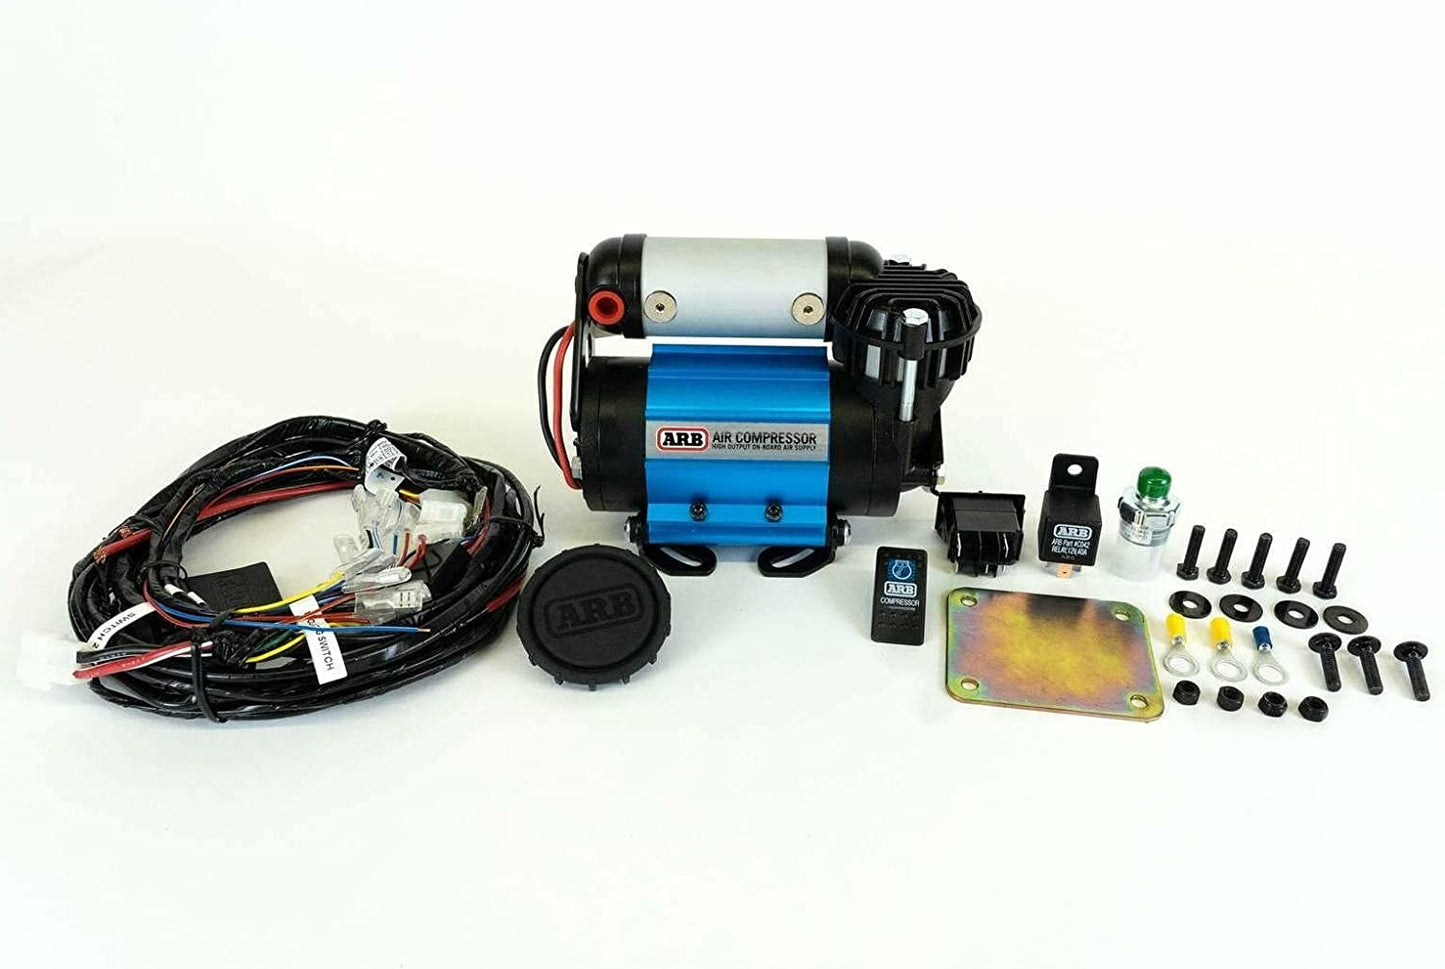 ARB CKMA12 On-Board Air Compressor High Performance 12 Volt for Air Locker Differentials and Tire Inflation